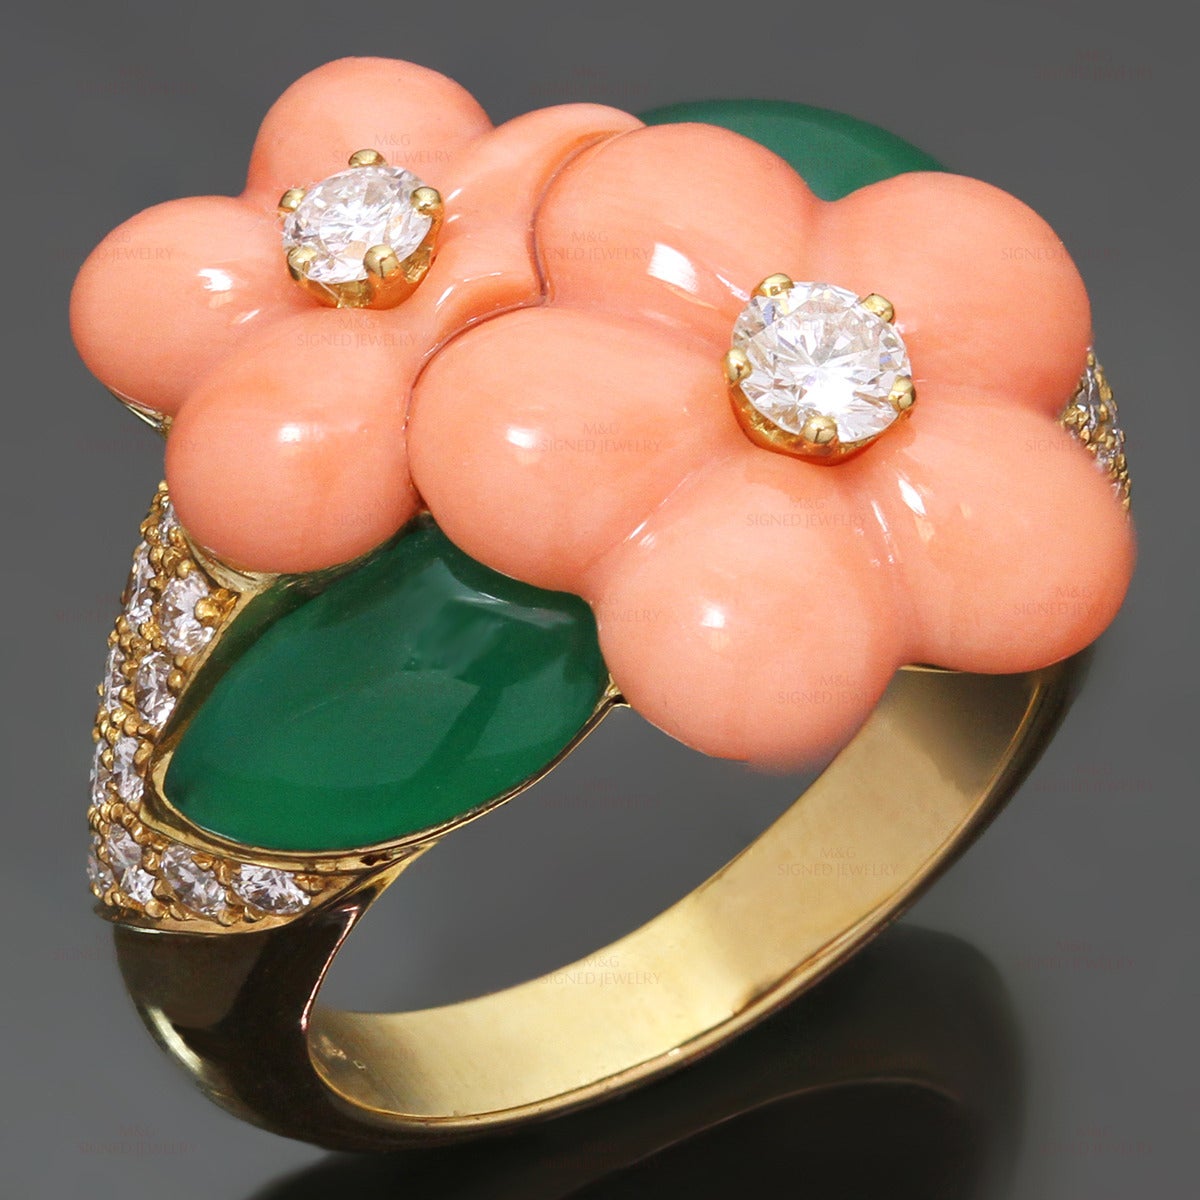 This elegant Van Cleef & Arpels ring is crafted in 18k yellow gold and beautifully inlaid with pink coral flowers and green chrysoprase leaves accented with round brilliant-cut D-F VVS1-VVS2 diamonds of an estimated 0.96 carats. Made in France